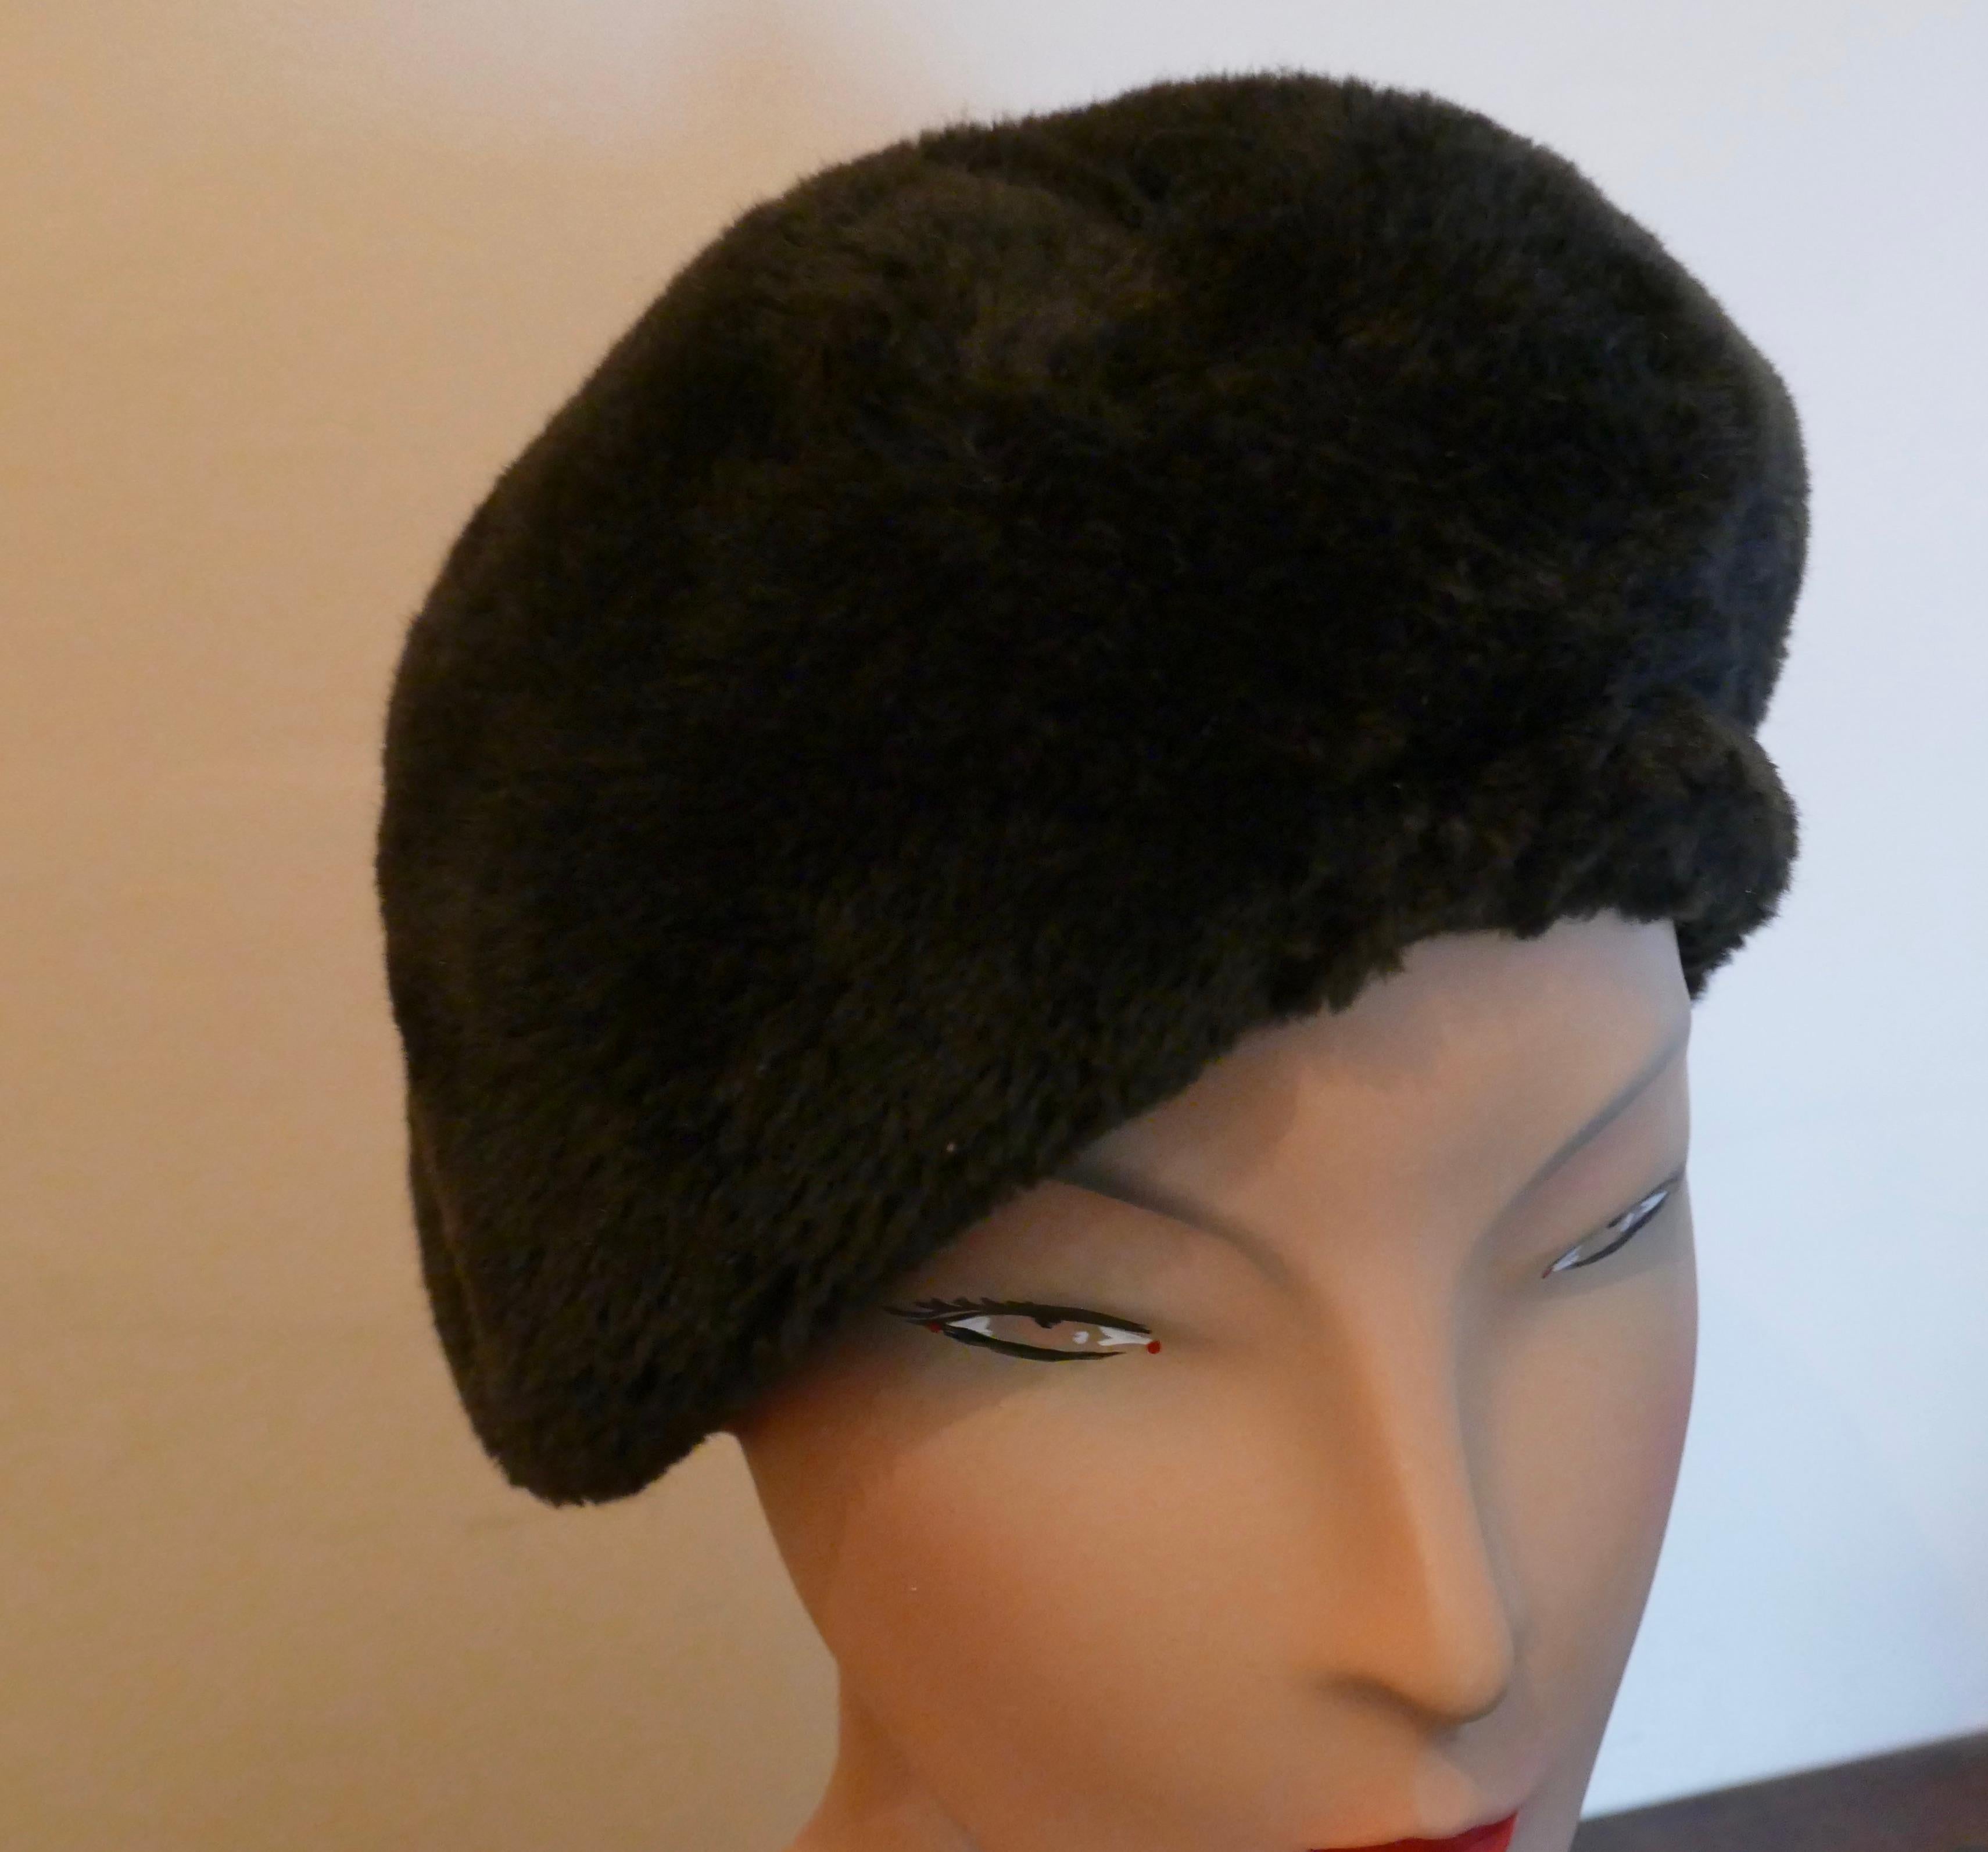 Original 1960s Fun Fur Beret Hat By Debenhams, Satin Lined 

This is great fun, the beret is made from felt fur it a very dark brown colour, the inside is lined in satin 
This one is a classic design by Debenette By Debenhams, London and Paris wear